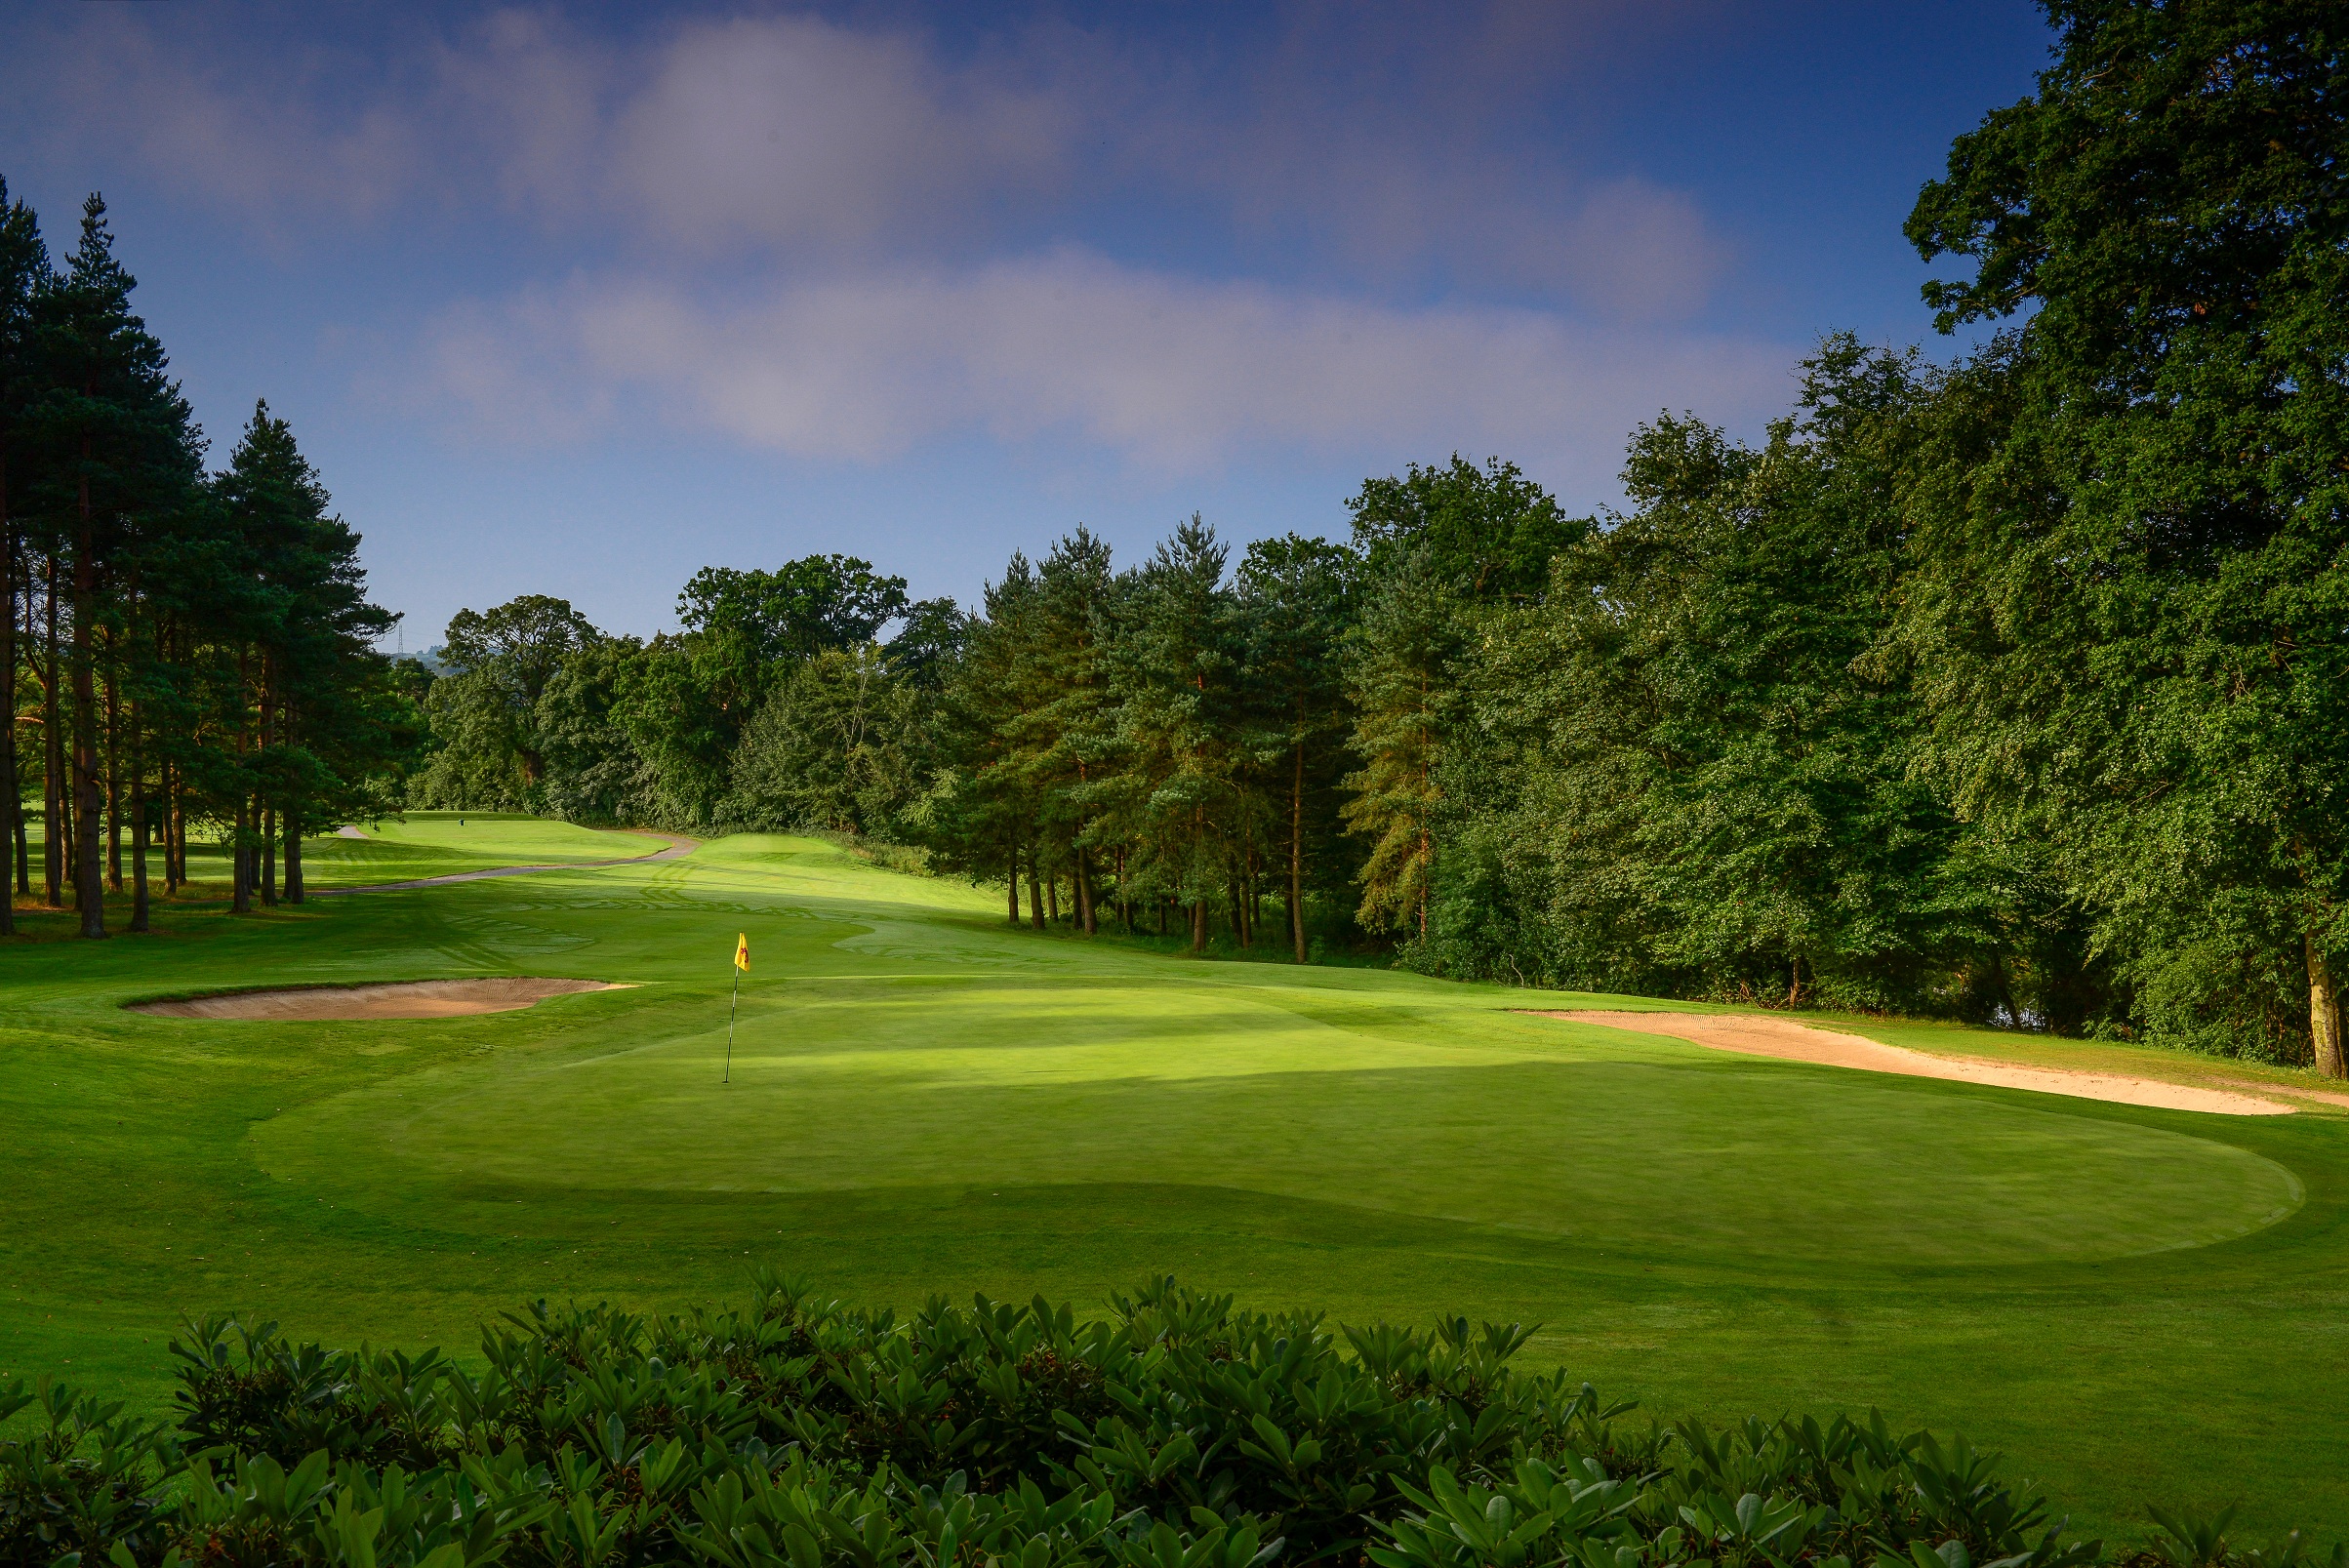 Malone is situated on 330 acres of woodland park (Photo: Malone Golf Club)